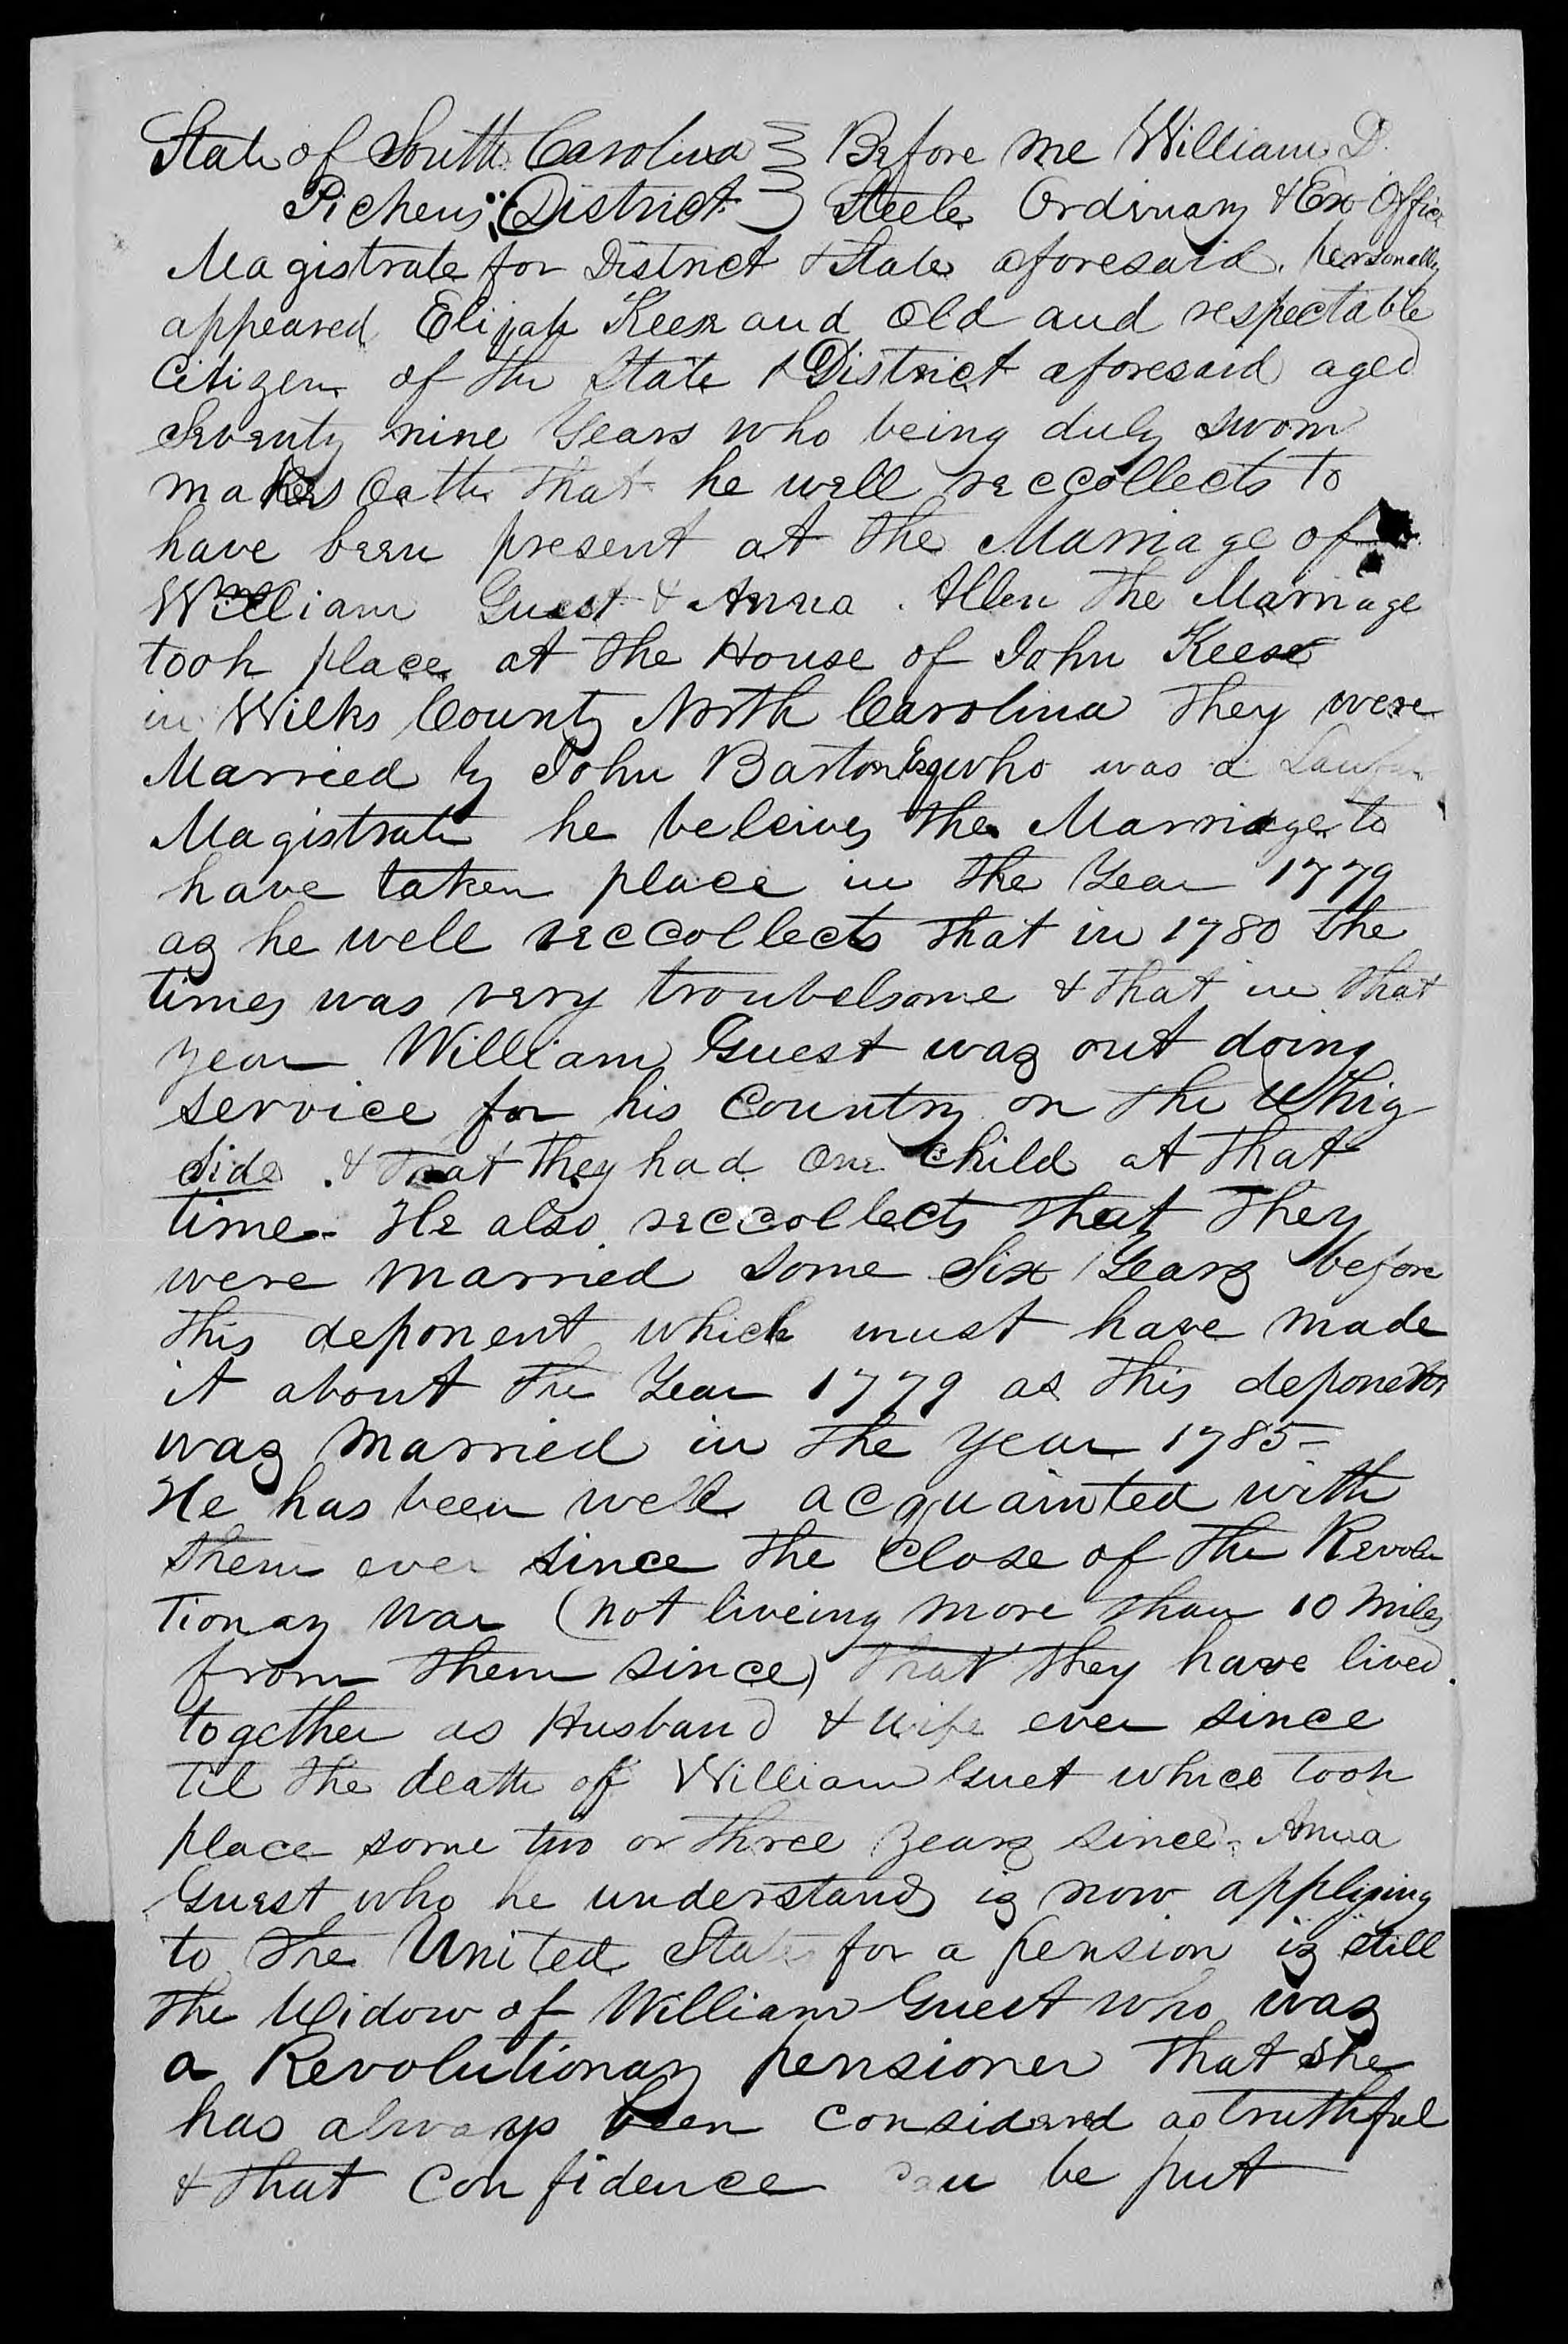 Affidavit of Elijah Keese in support of a Pension Claim for Anna Guest, 4 September 1845, page 1